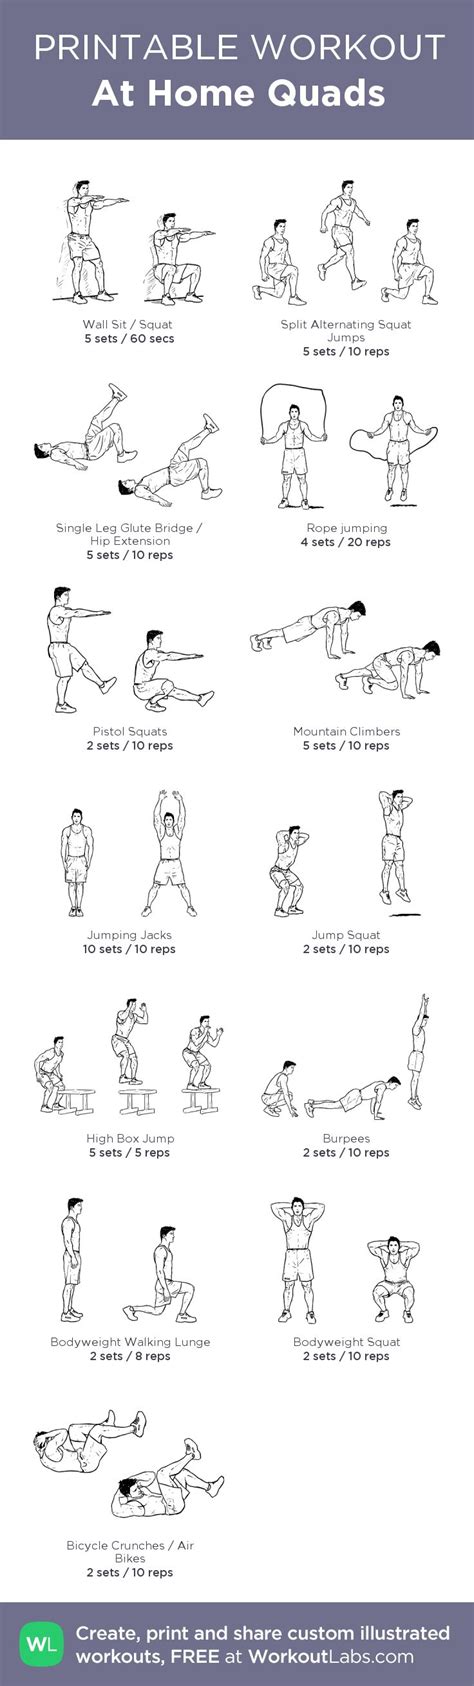 1000+ ideas about Softball Workouts on Pinterest | Soccer ...